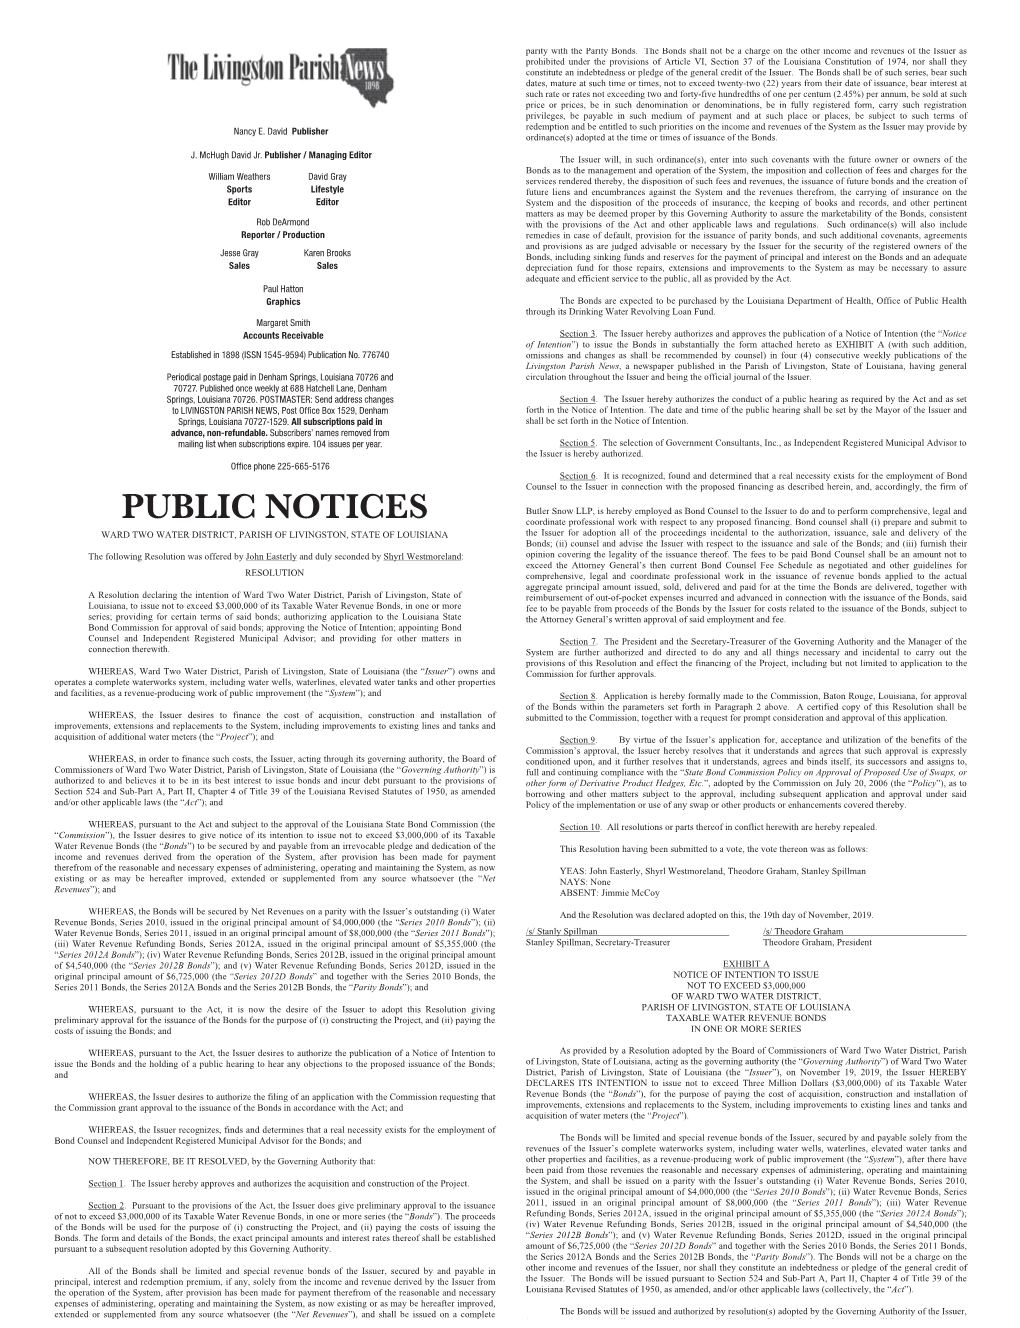 PUBLIC NOTICES Coordinate Professional Work with Respect to Any Proposed Financing